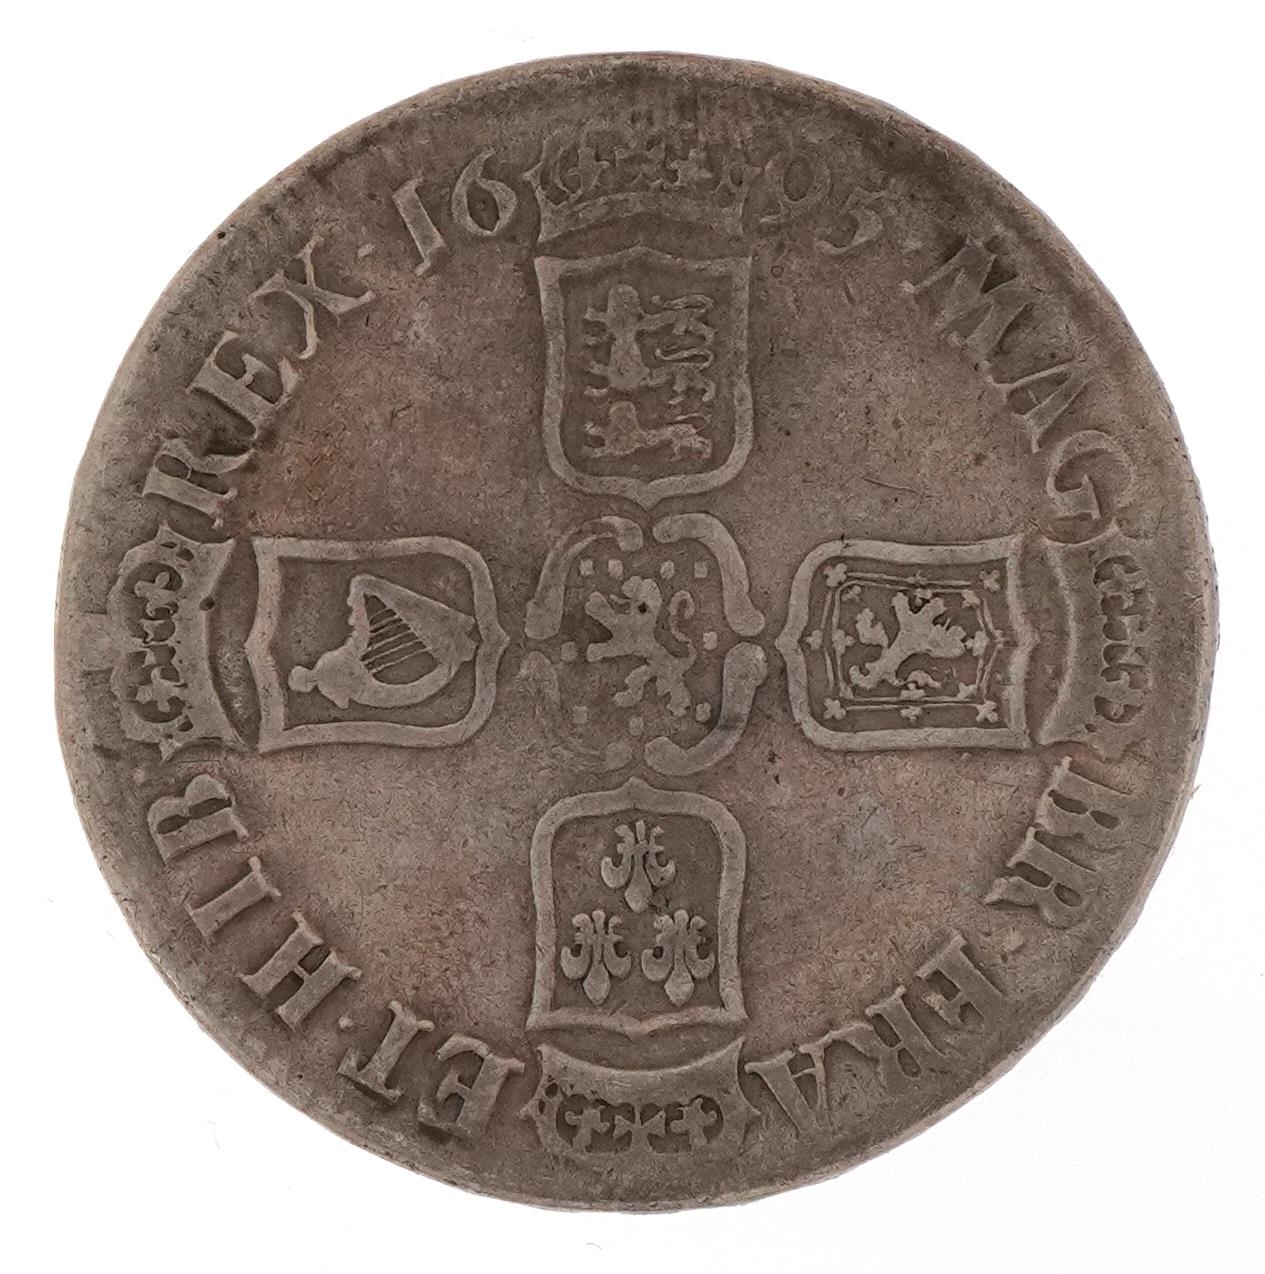 William III 1695 silver crown dated 1695 - Image 2 of 3